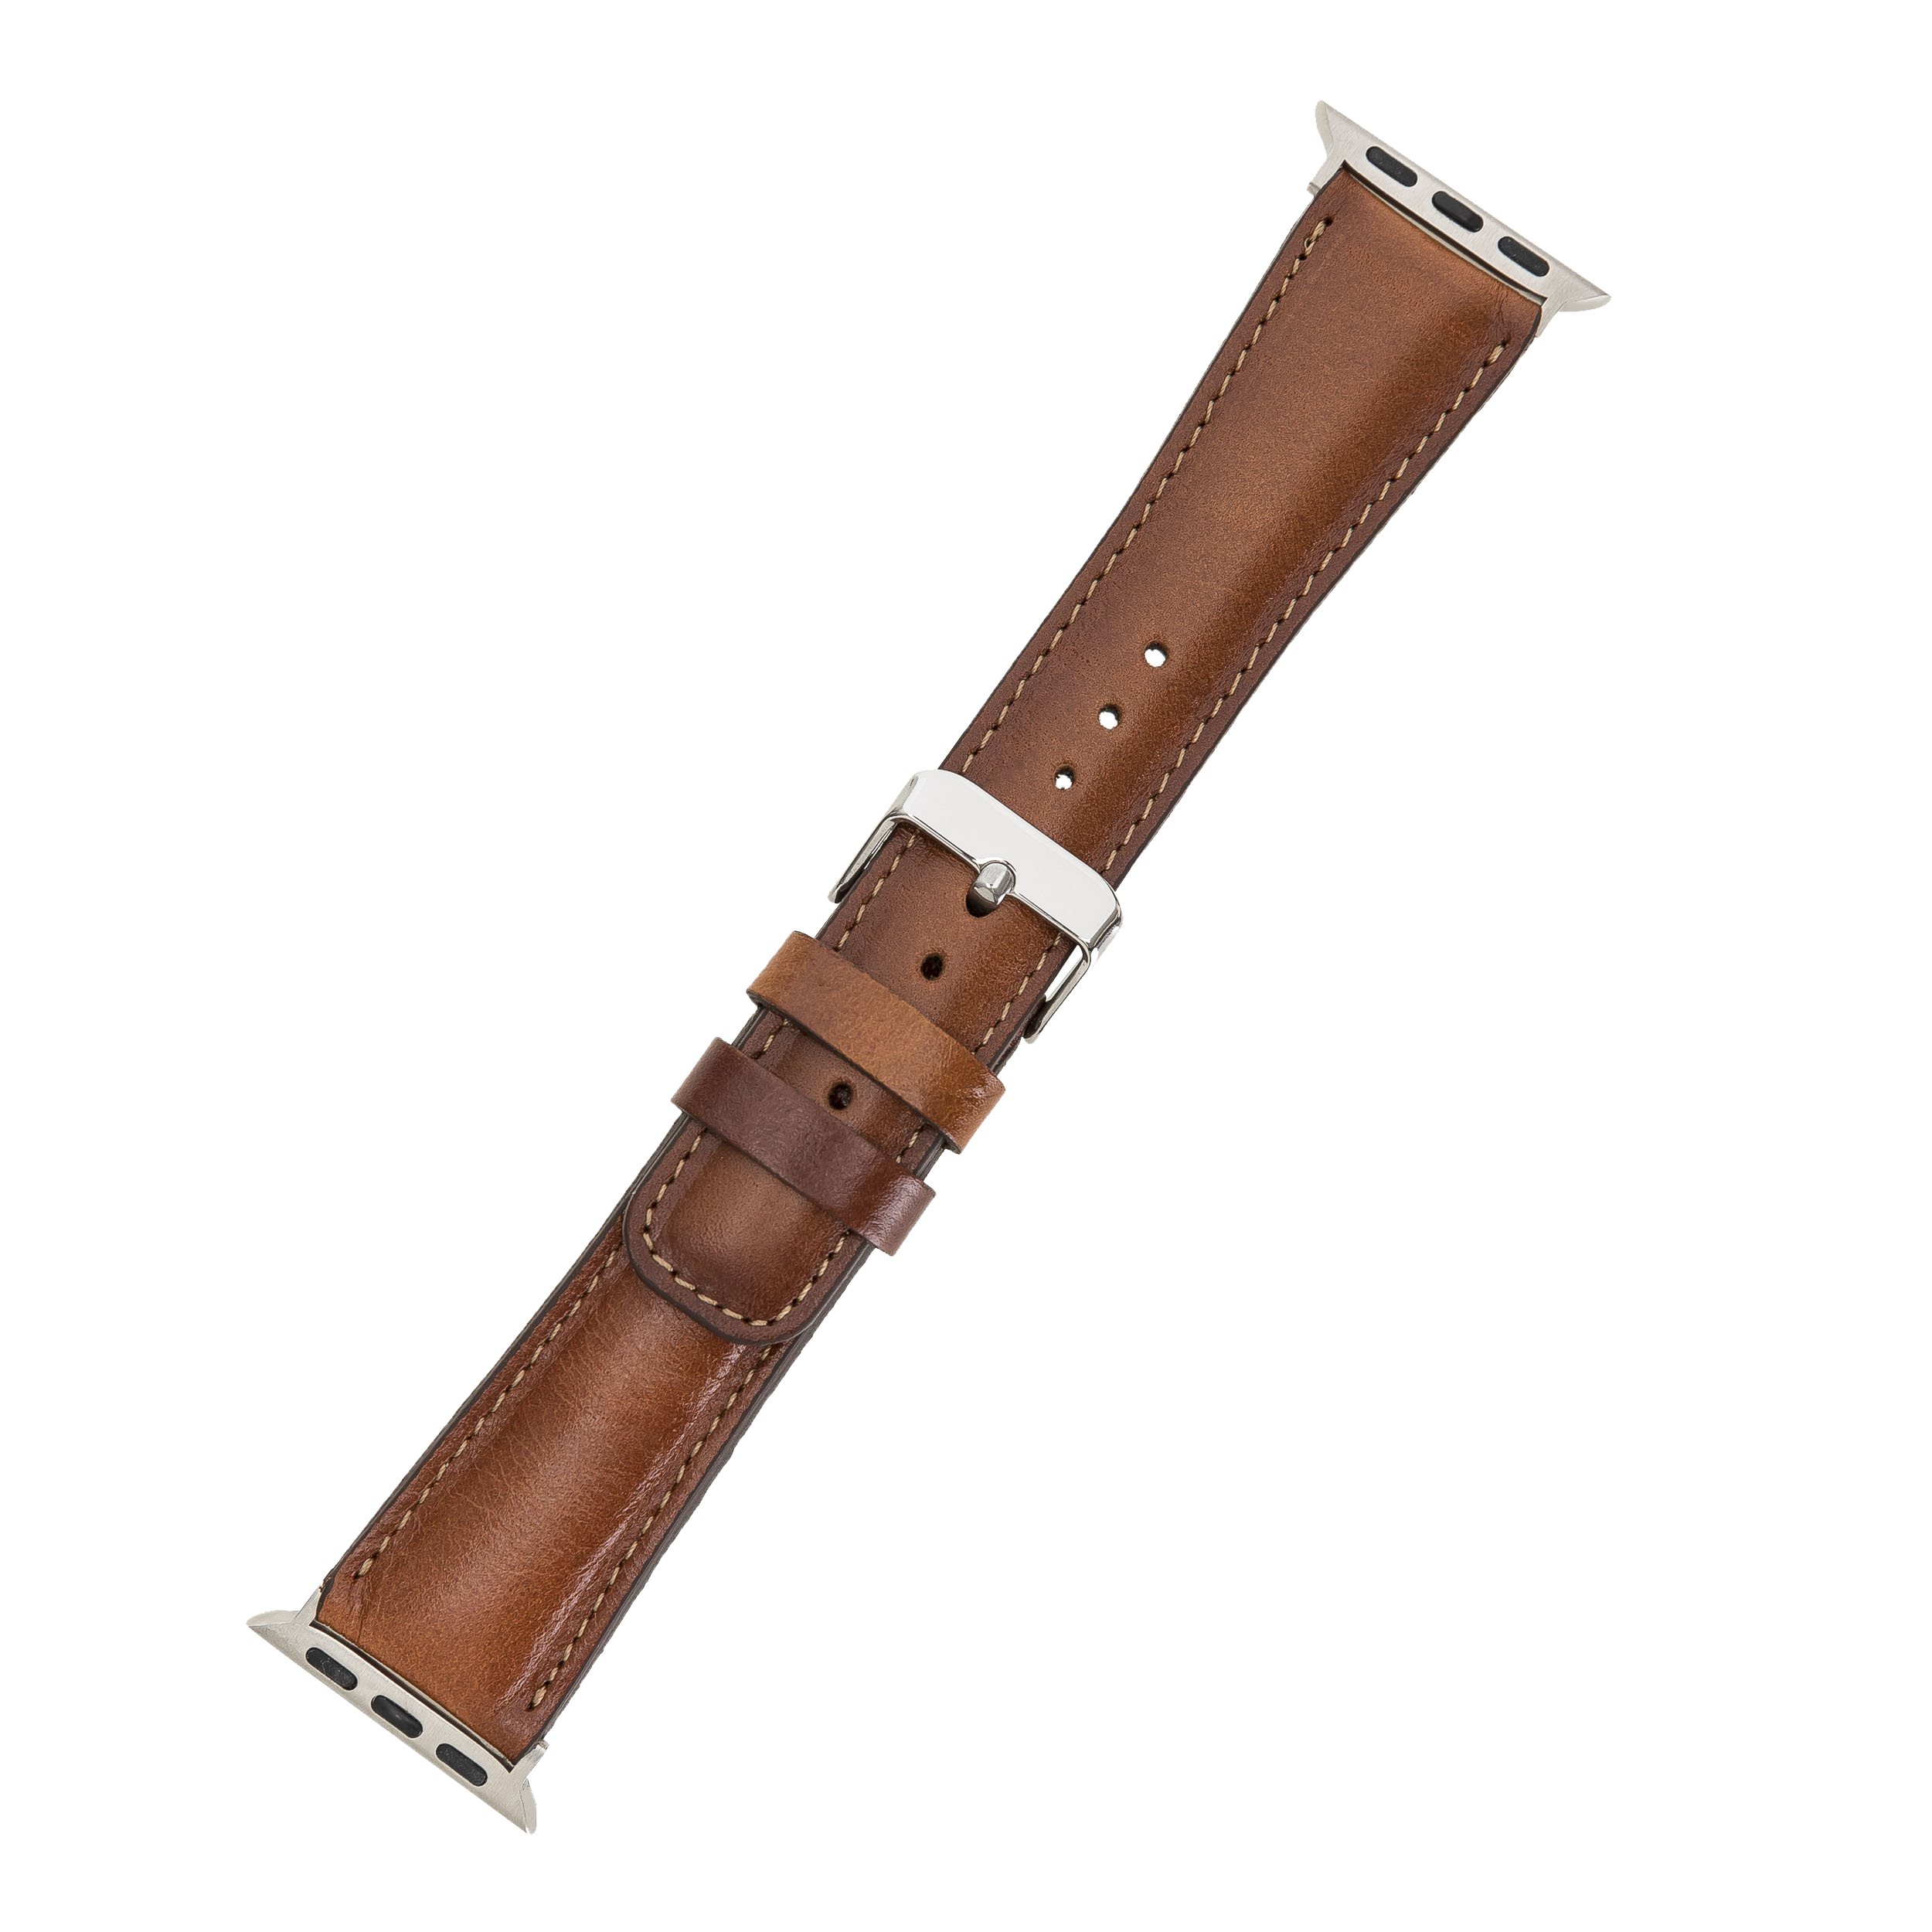 LupinnyLeather Liverpool Collection Leather Watch Band for Apple & Fitbit Versa Watch Band 18